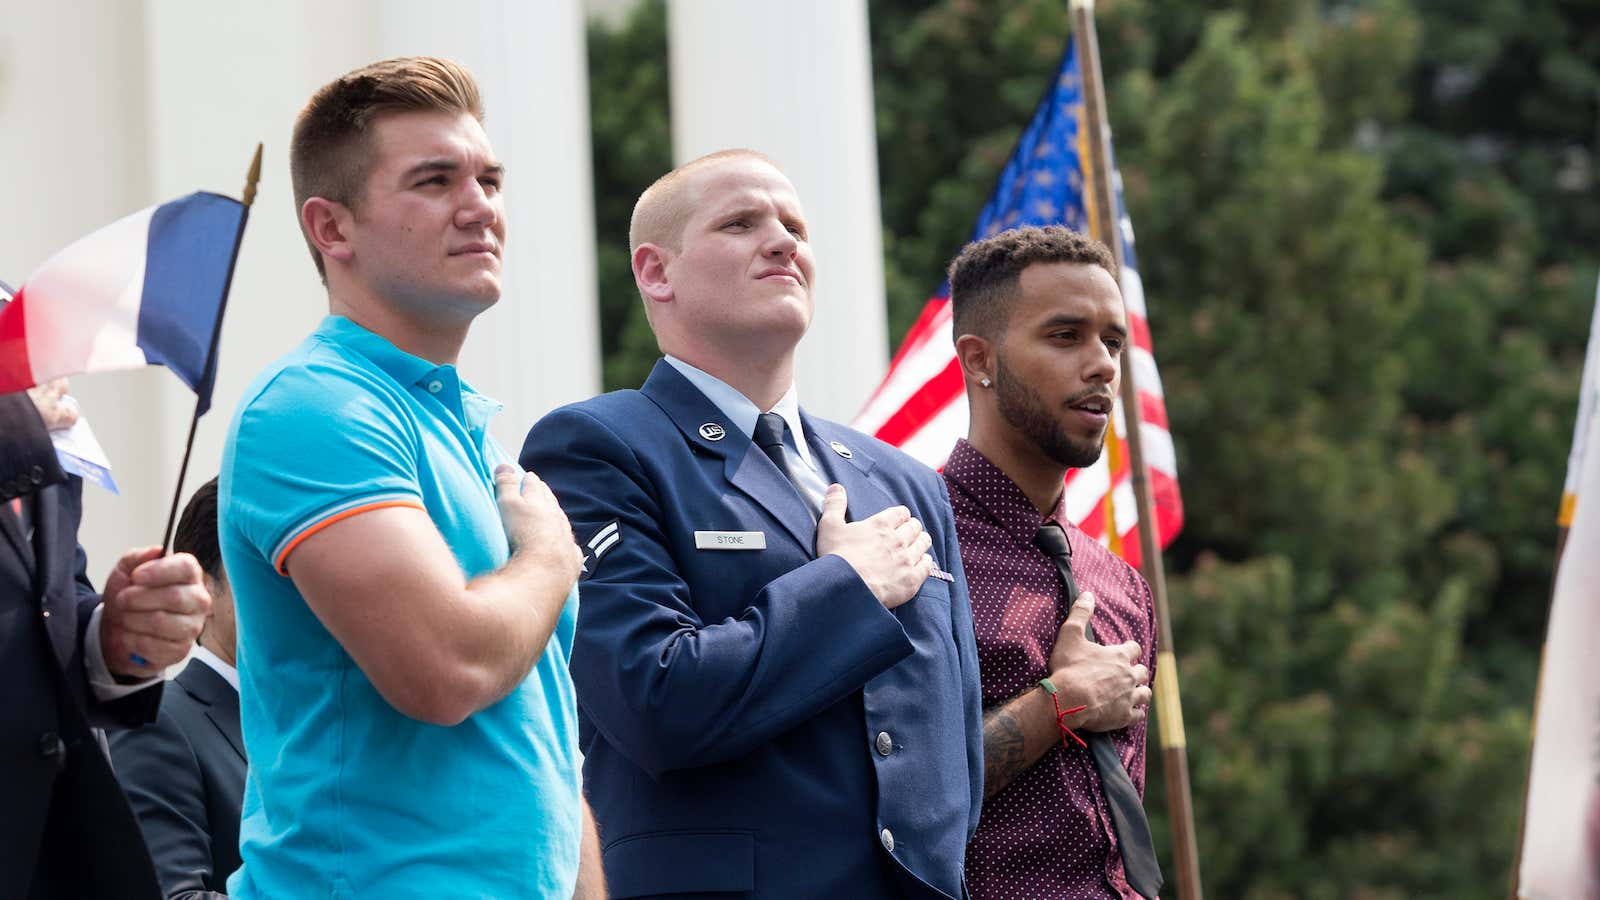 Spencer Stone, center, stands with two friends during a parade held in their honor, after the three stopped an armed gunman from attacking a French train.